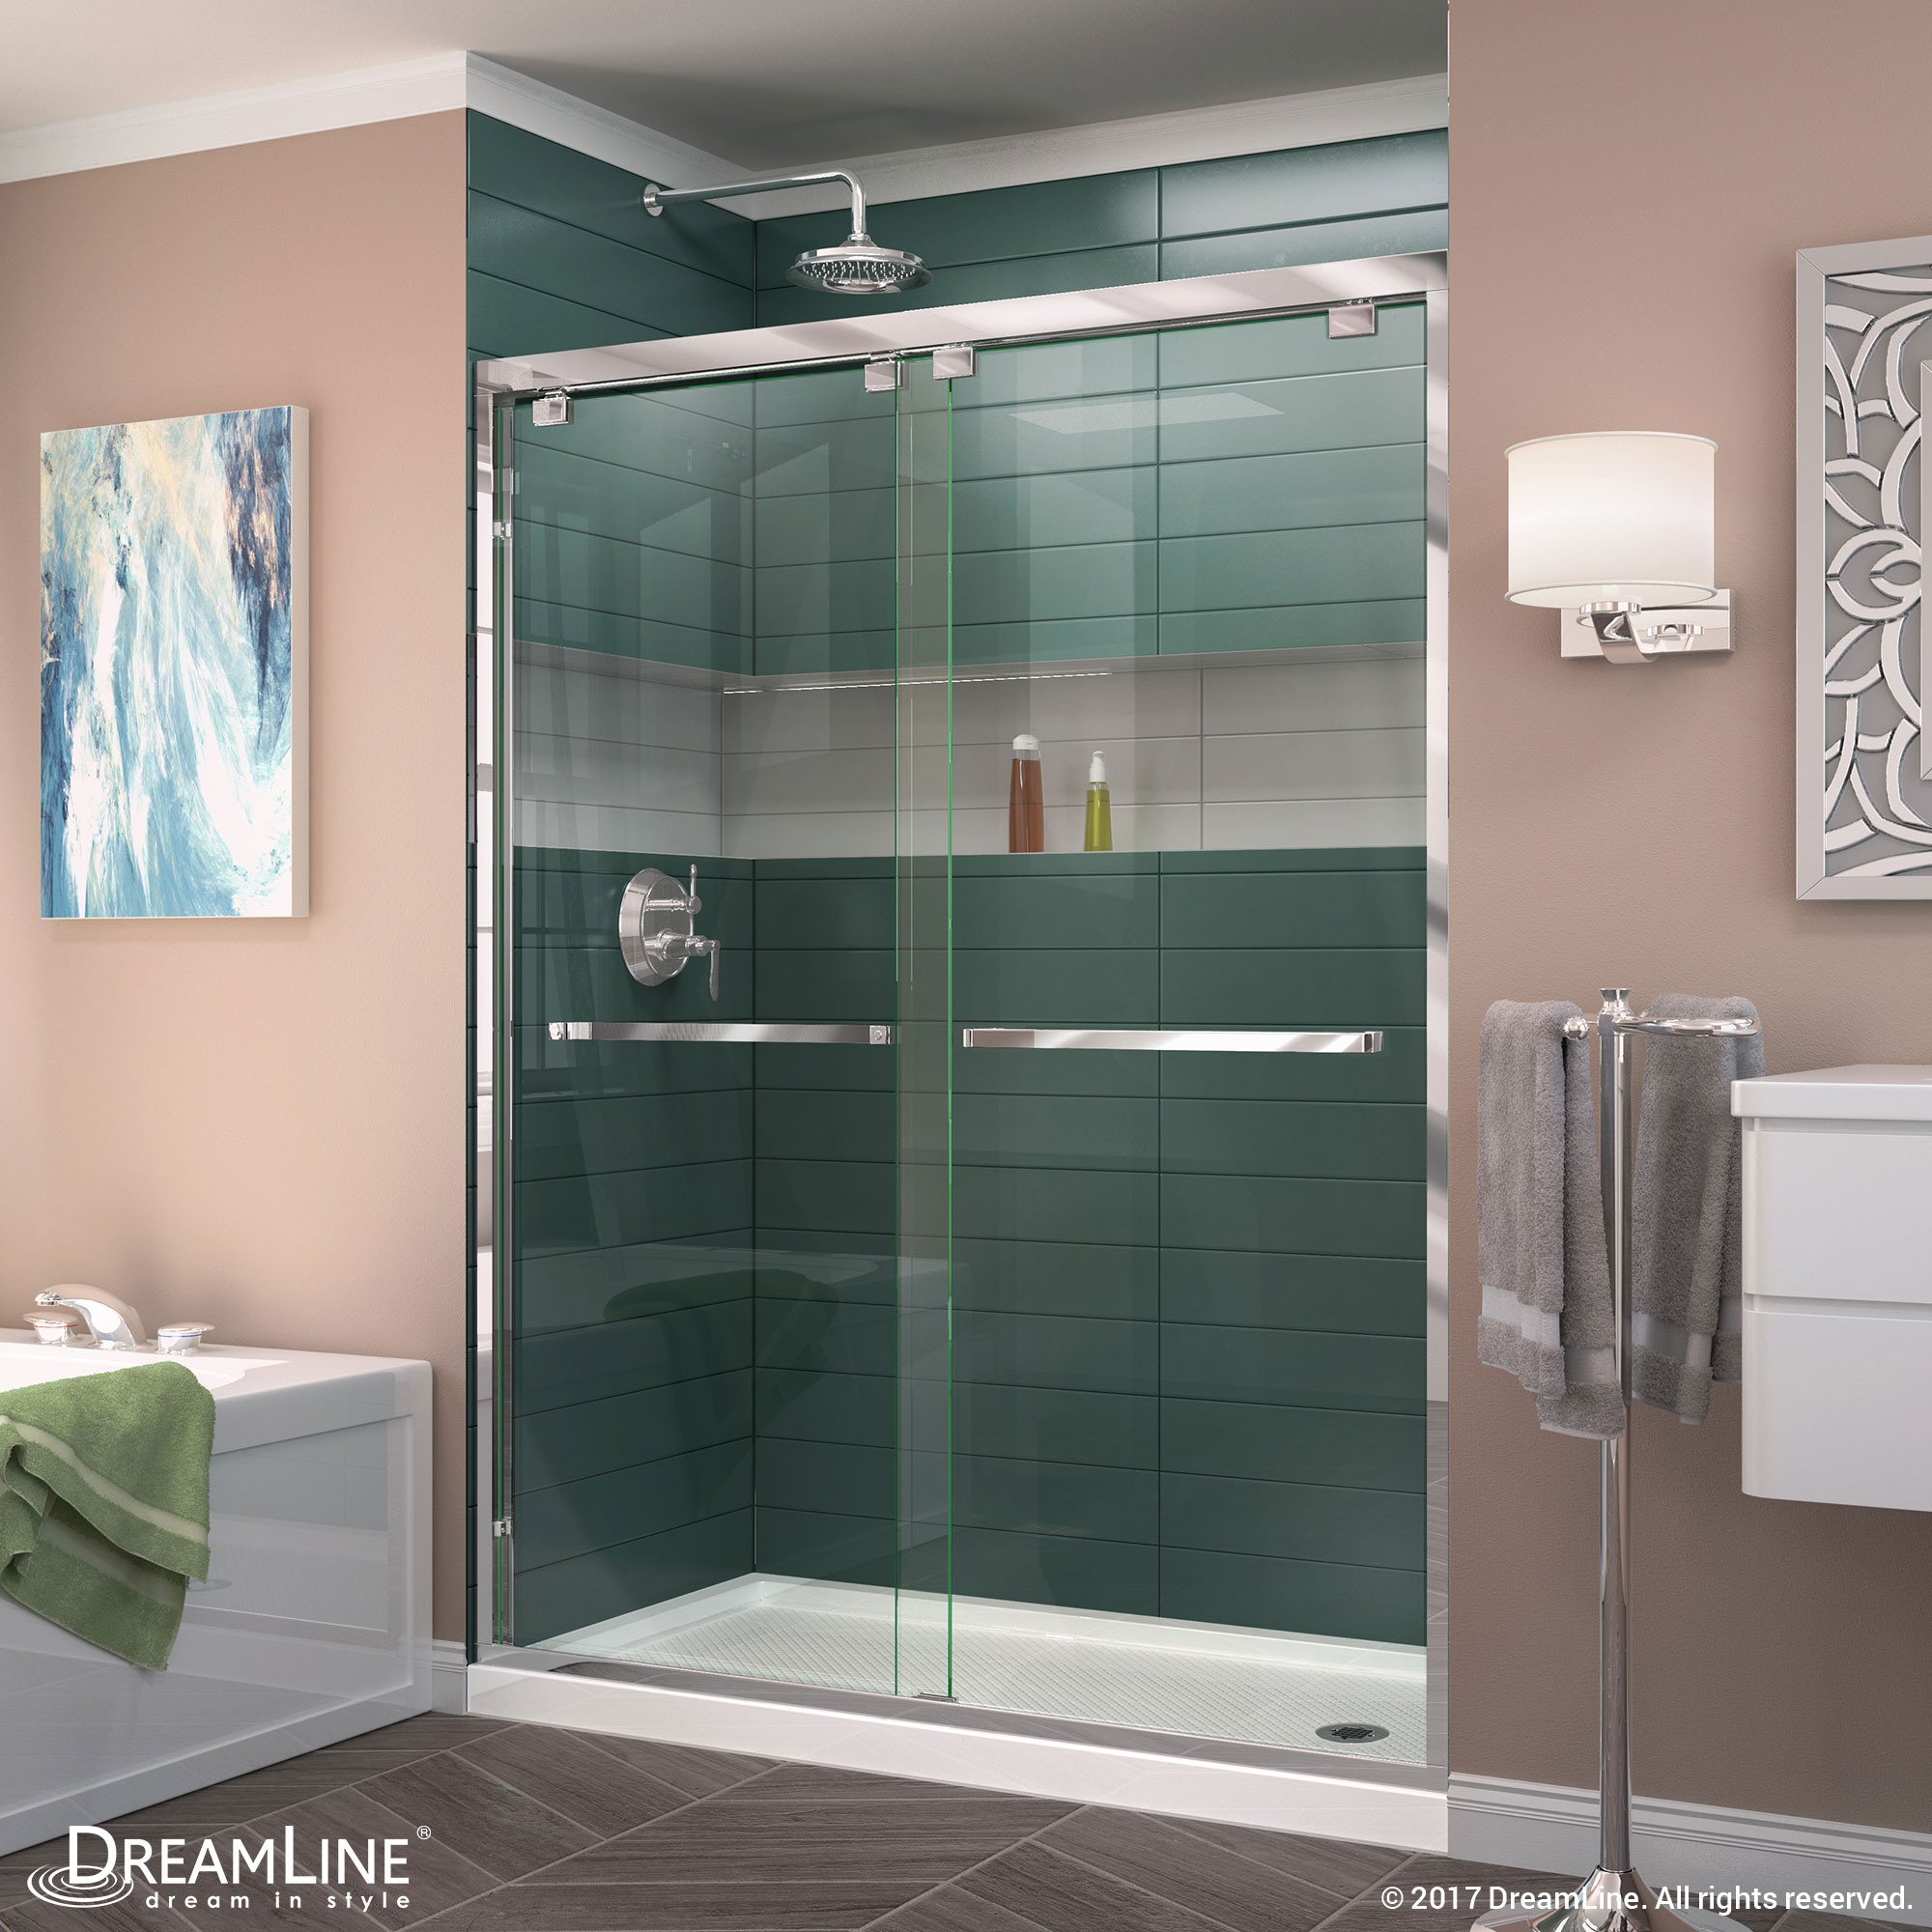 DreamLine Encore 36 in. D x 60 in. W x 78 3/4 in. H Bypass Shower Door in Satin Black and Right Drain White Base Kit